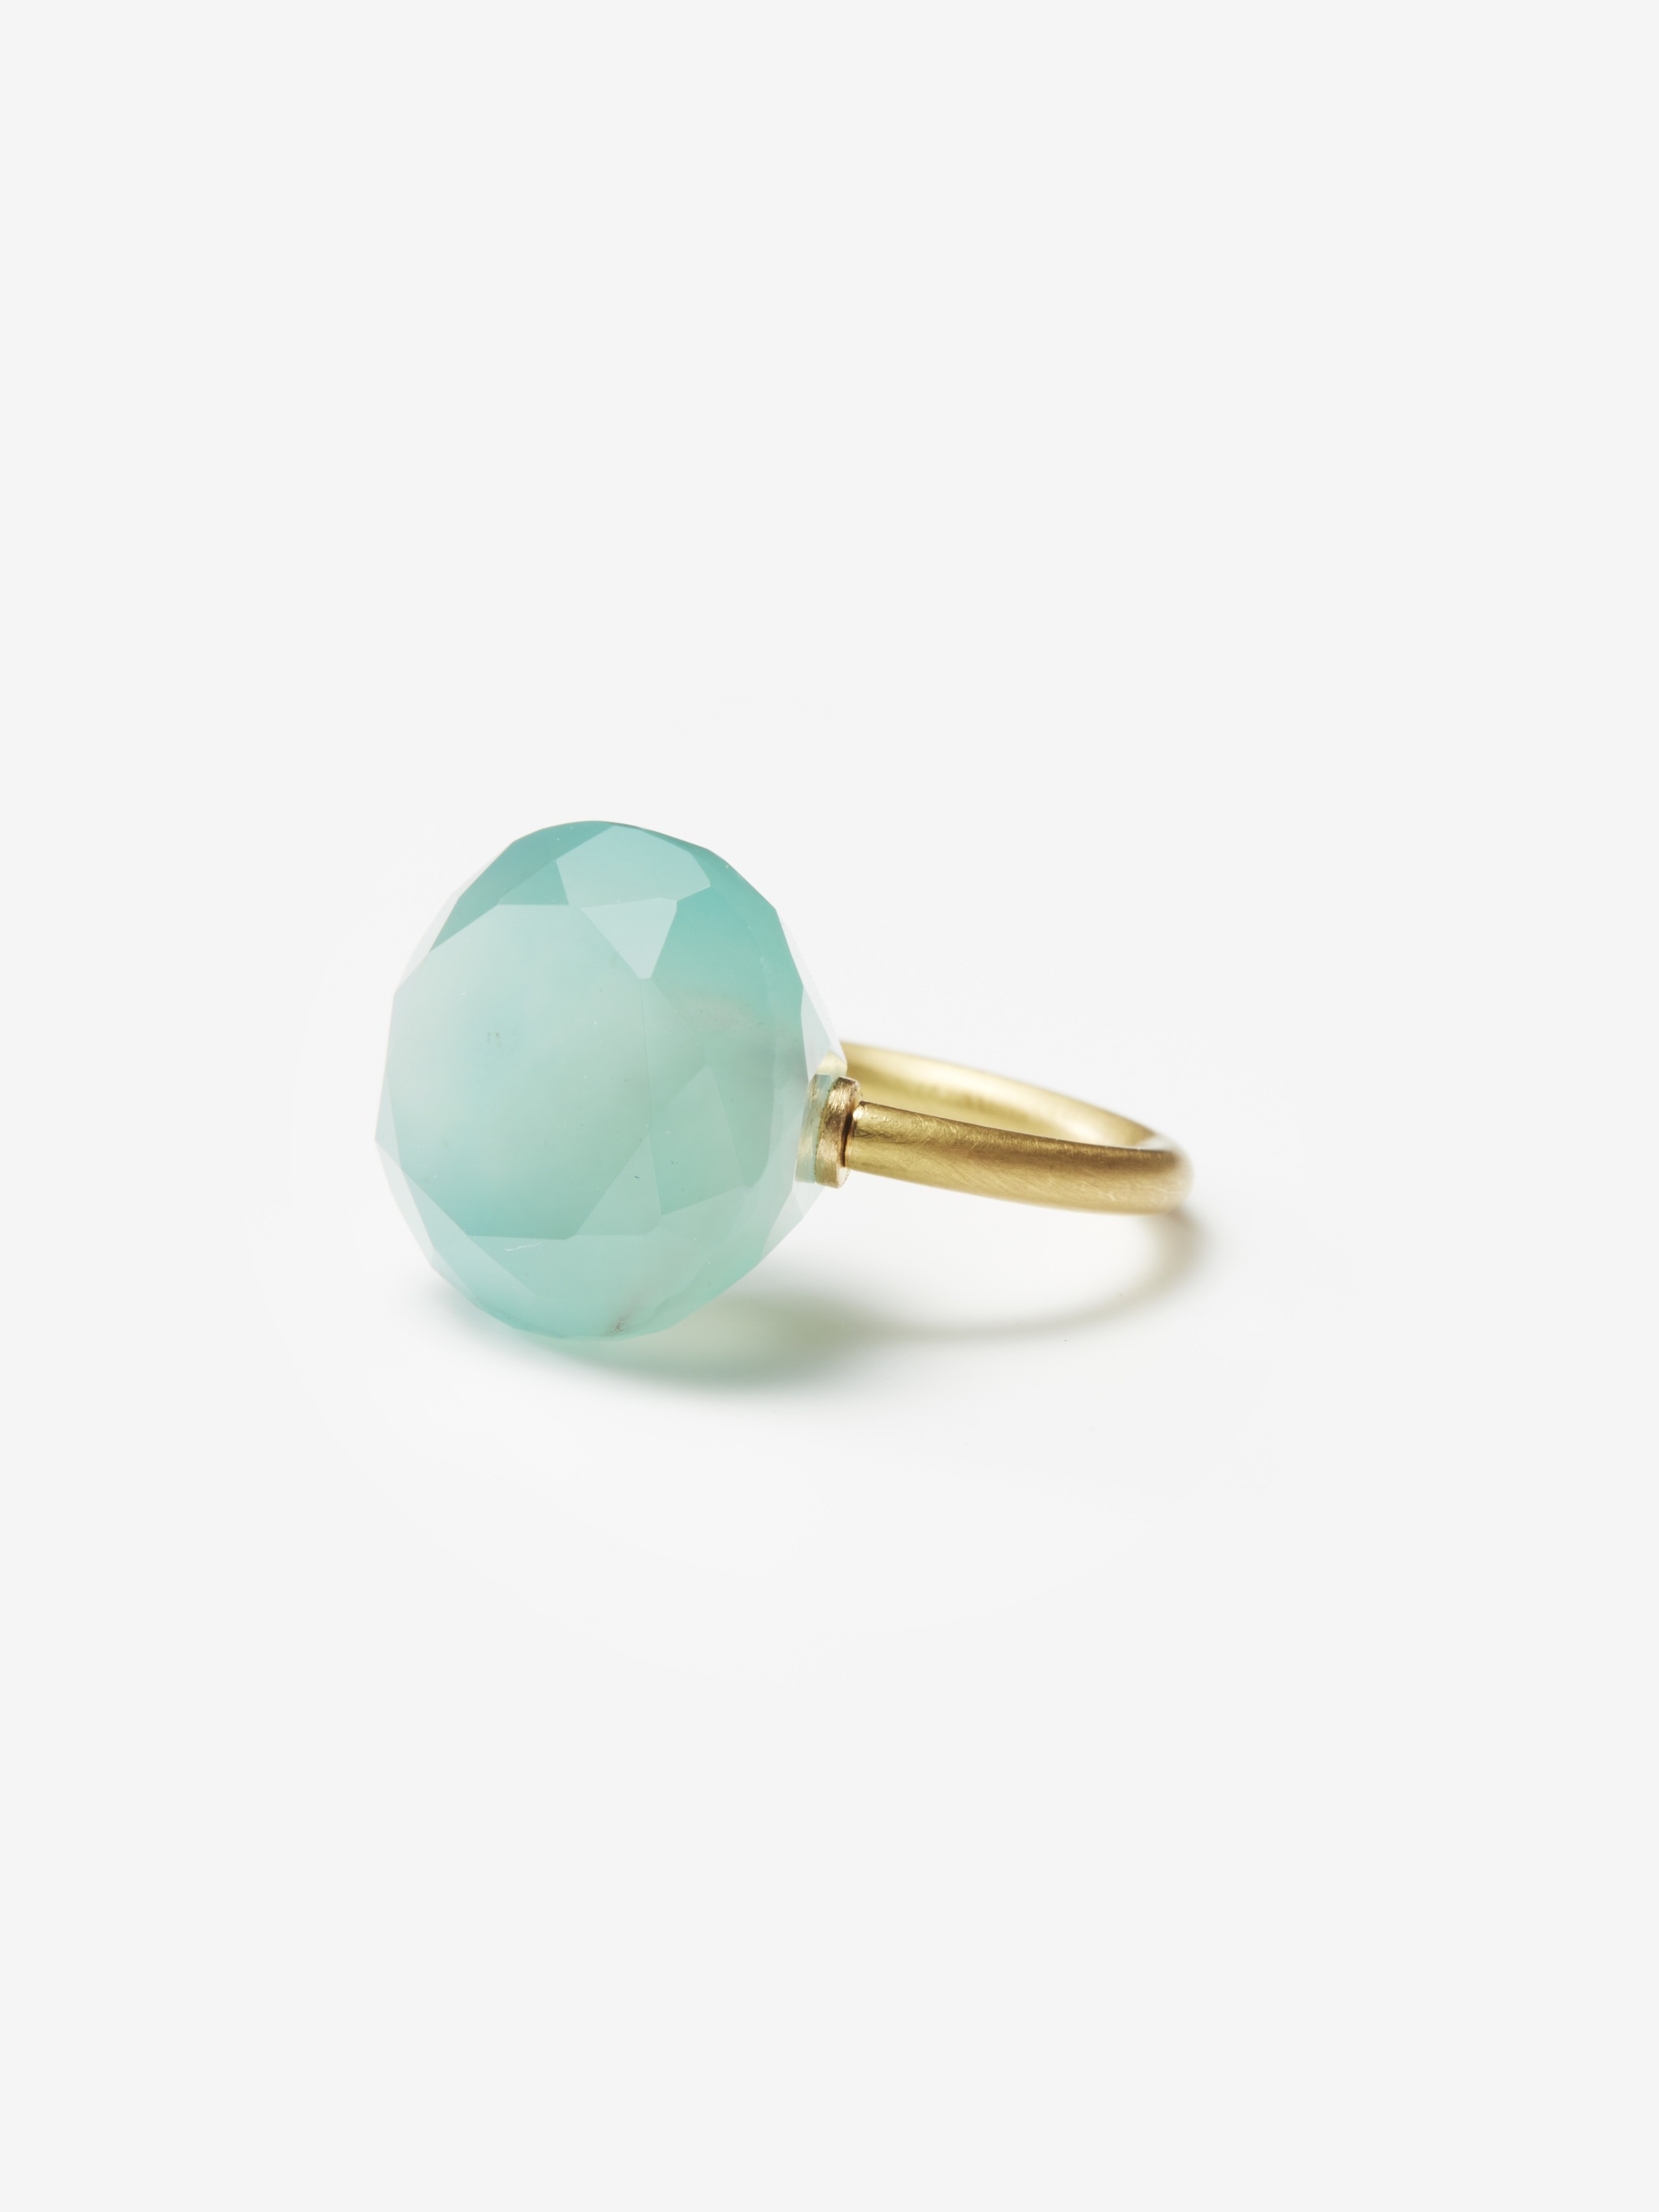 gallery deux poissons online | 【SOLD OUT】Etsuko Sonobe ring/アクアプレーズ